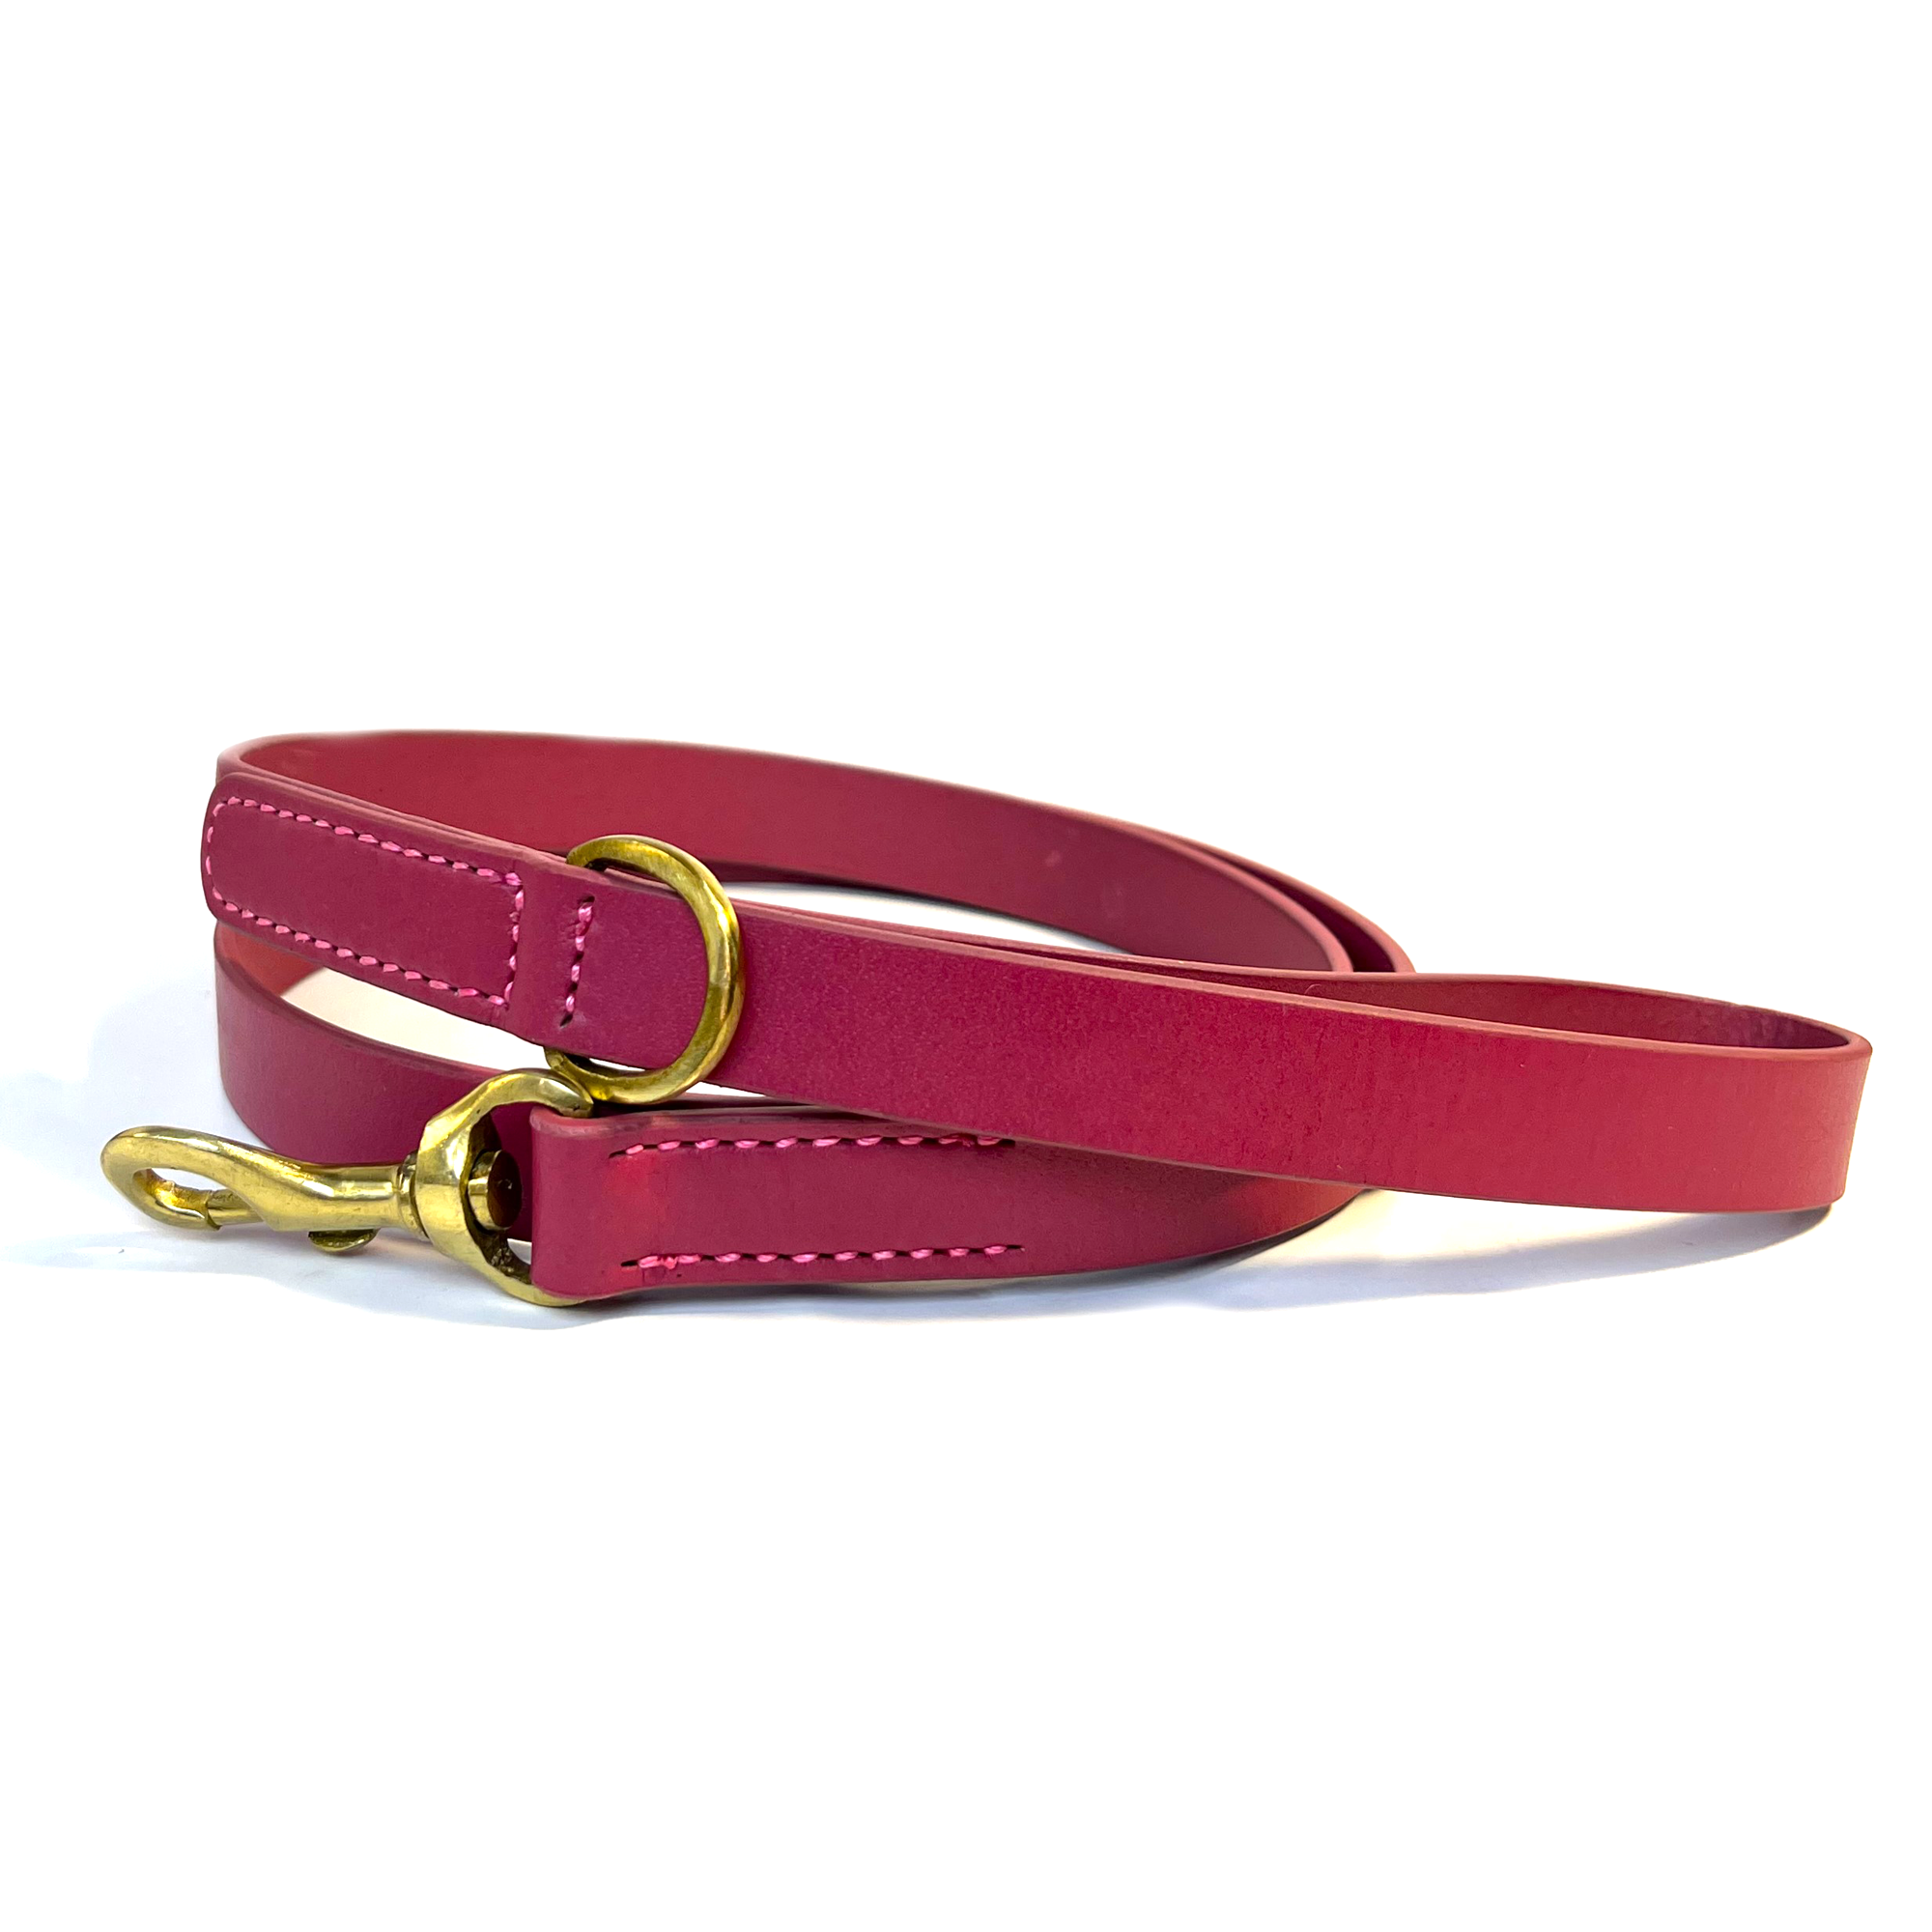 A Bald Lead Ruby dog leash in burgundy buffalo leather with a golden clasp and metal ring, showcasing a simple yet elegant design for pet owners, isolated on a white background by Georgie Paws.